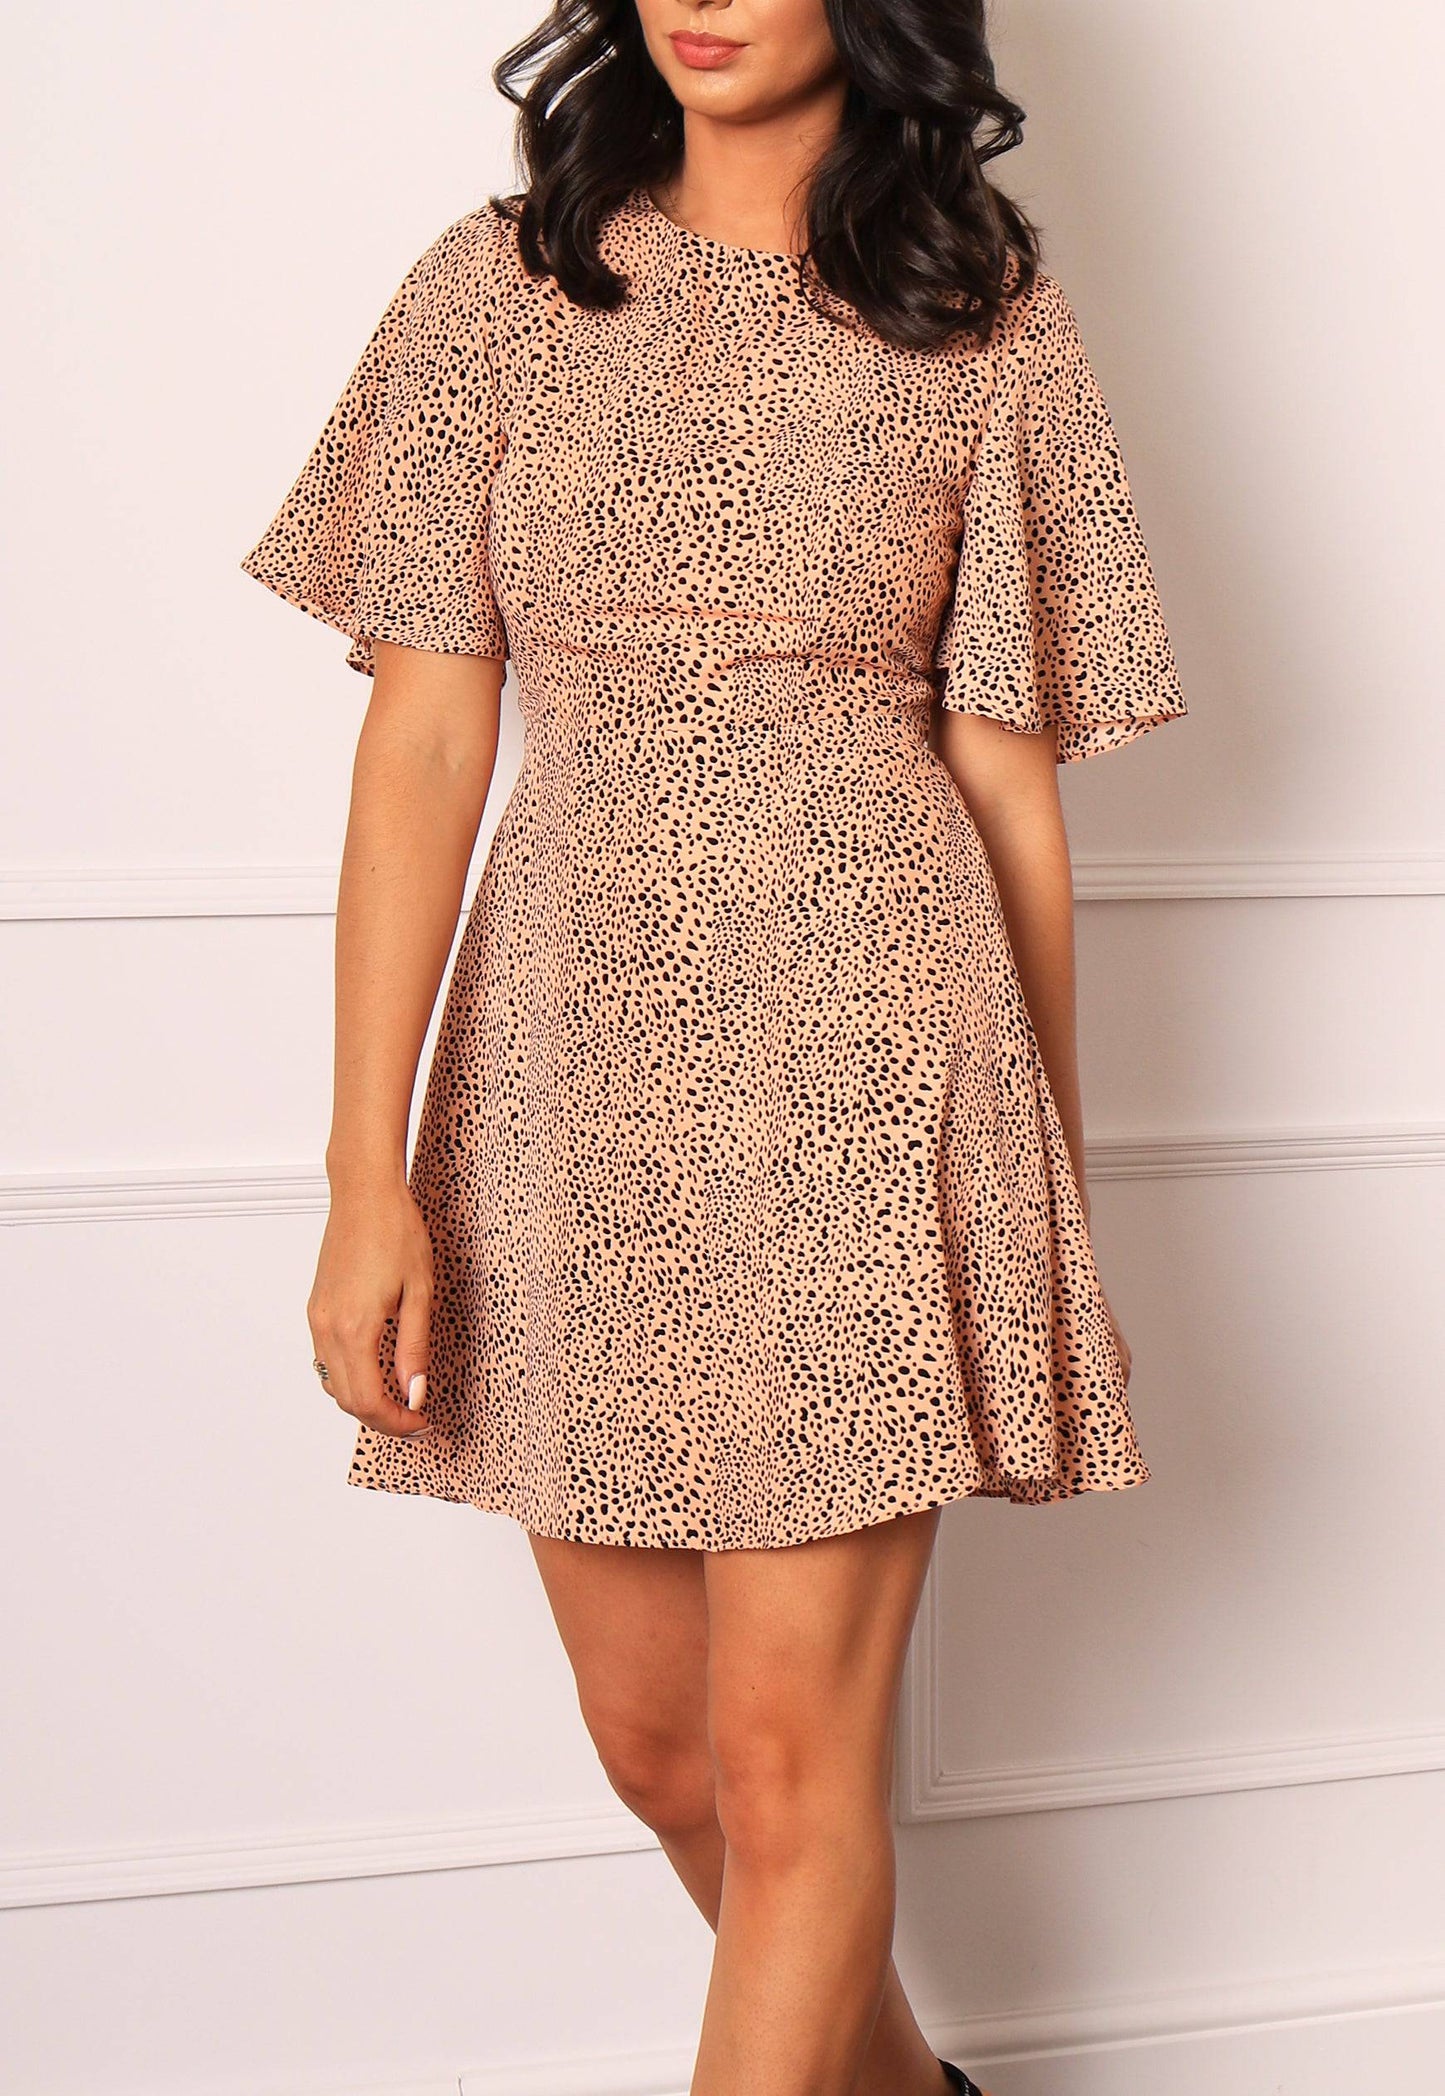 Dalmatian Print Fit & Flare Mini Dress with Short Angel Sleeve in Nude & Black - One Nation Clothing